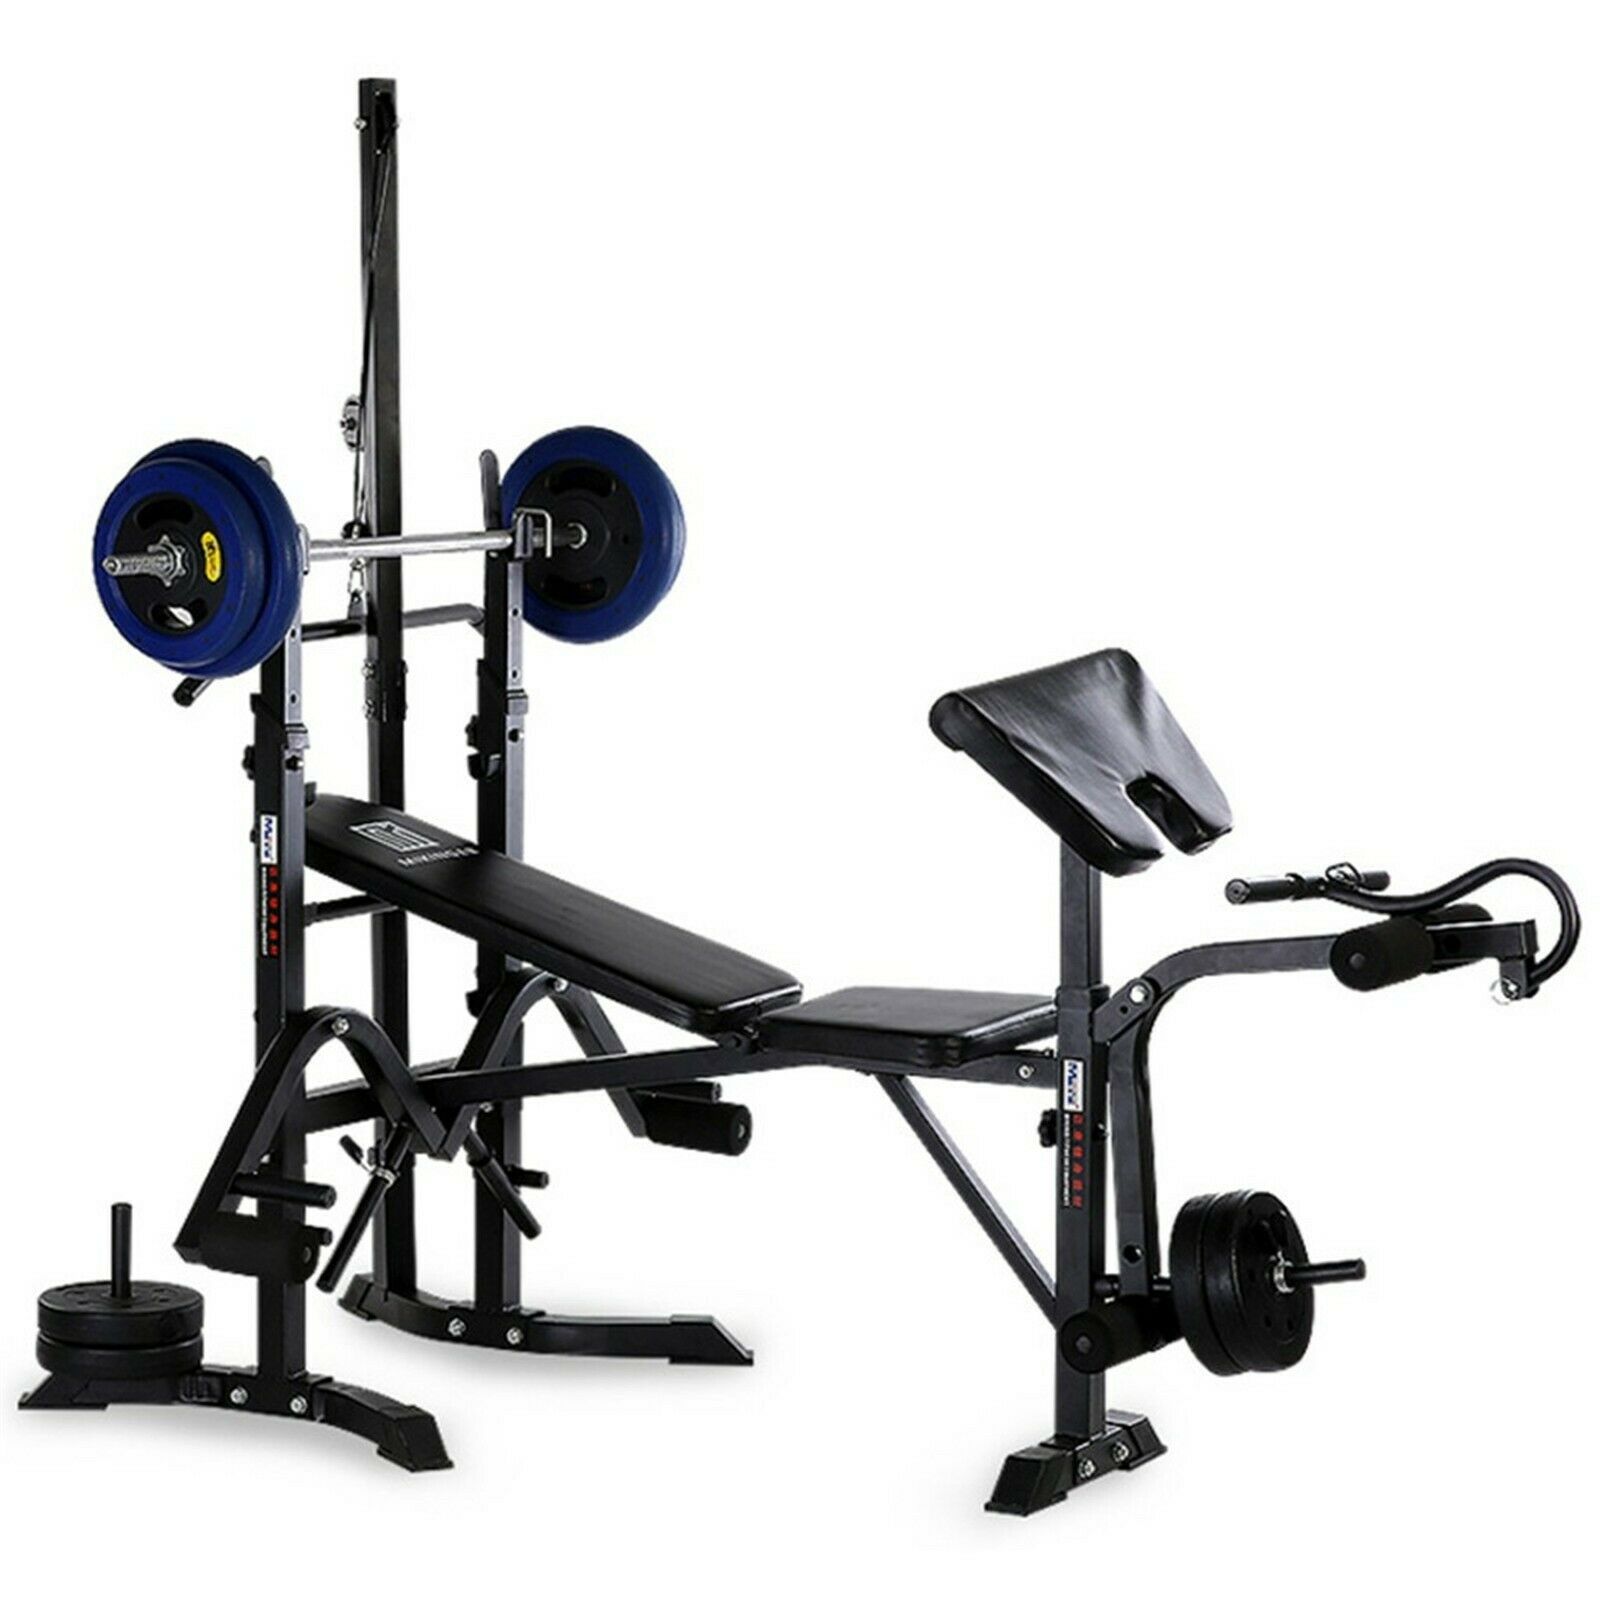 Everyday Essentials Home Gym Exercise Equipment Bench Strength Workout Station